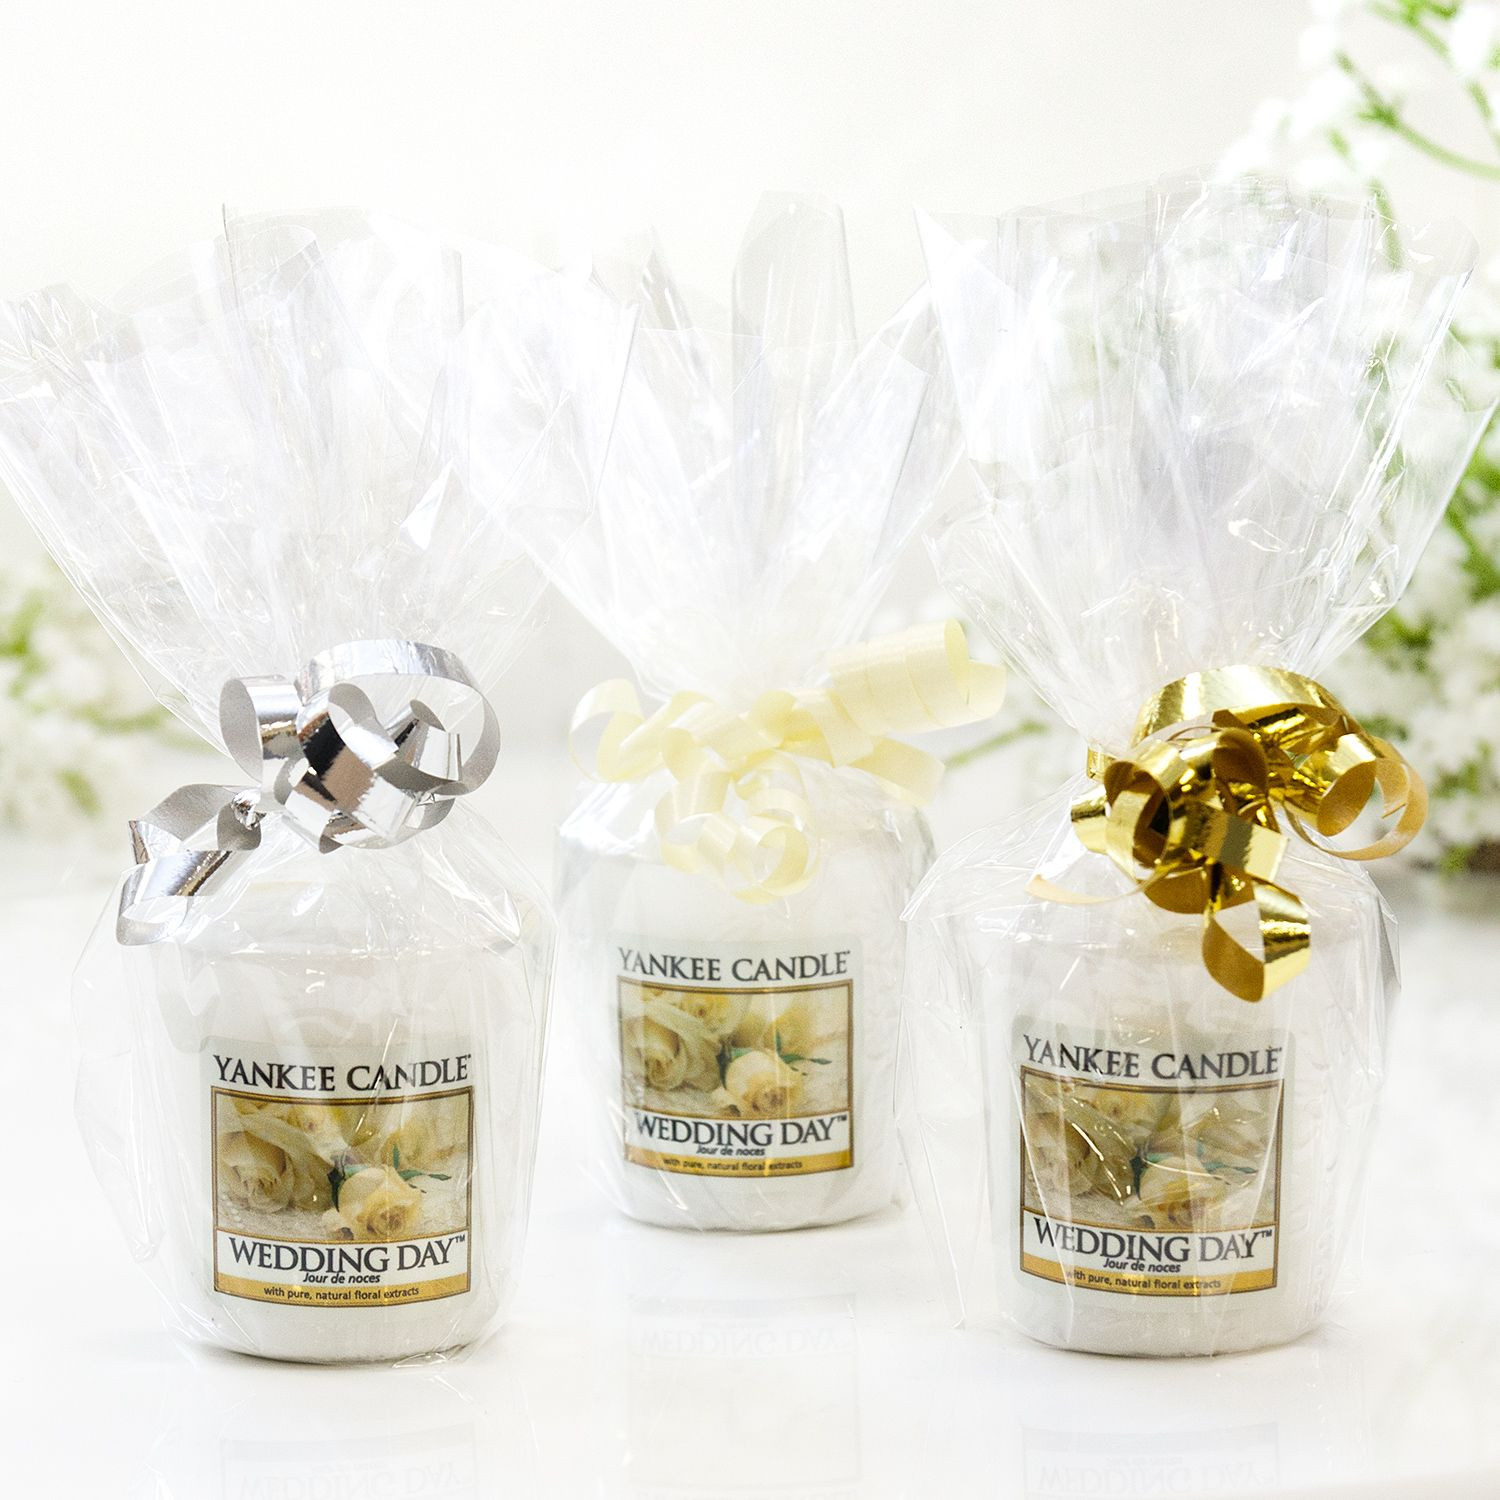 Yankee Candle Wedding Favors
 Yankee Candle Cellophane Wrapped Wedding Day Sampler